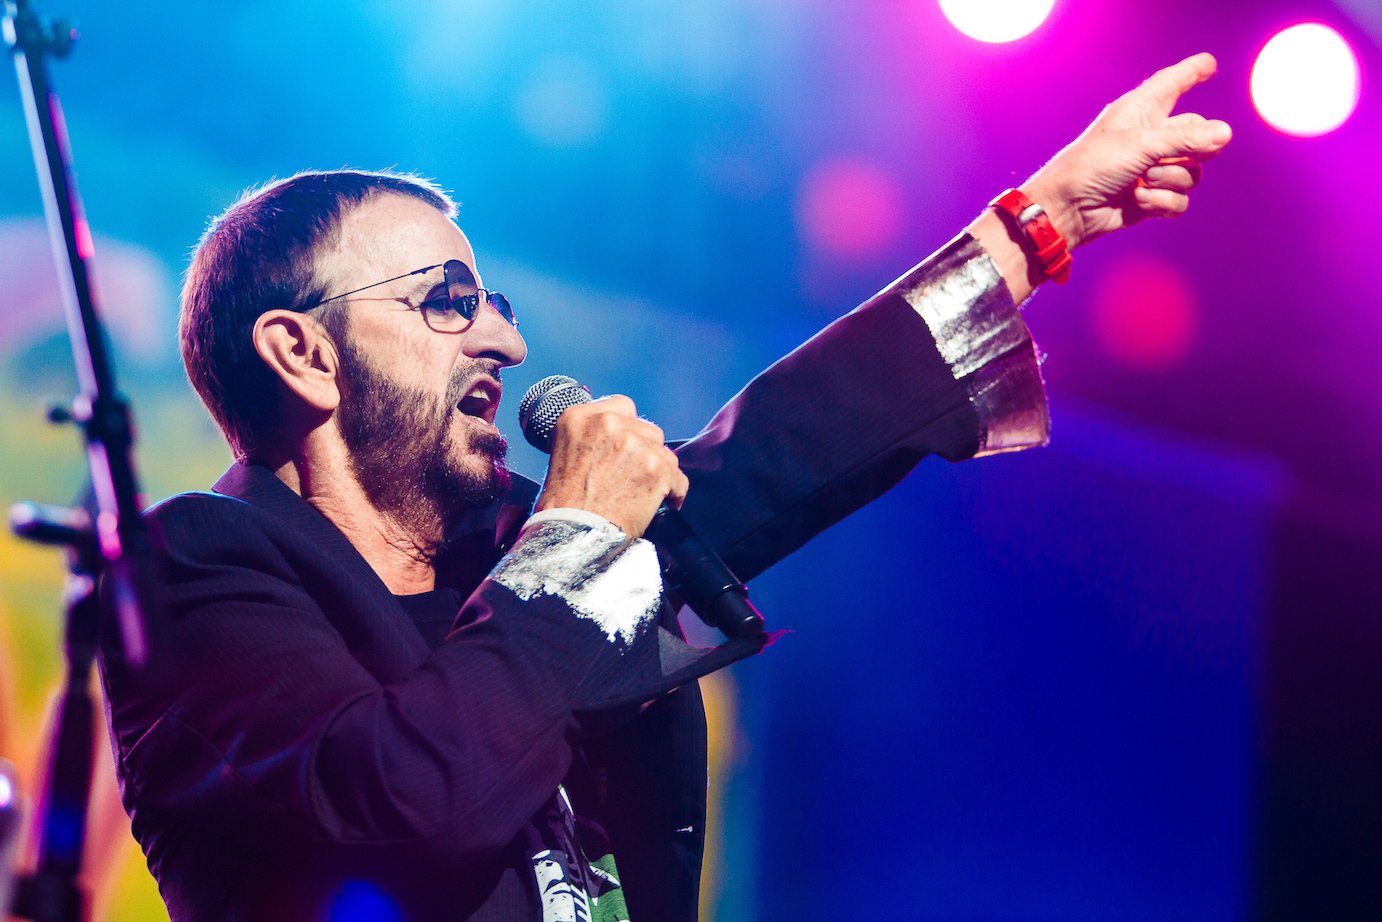 Ringo Starr performing on stage at the Credicard Hall in Sao Paulo, Brazil